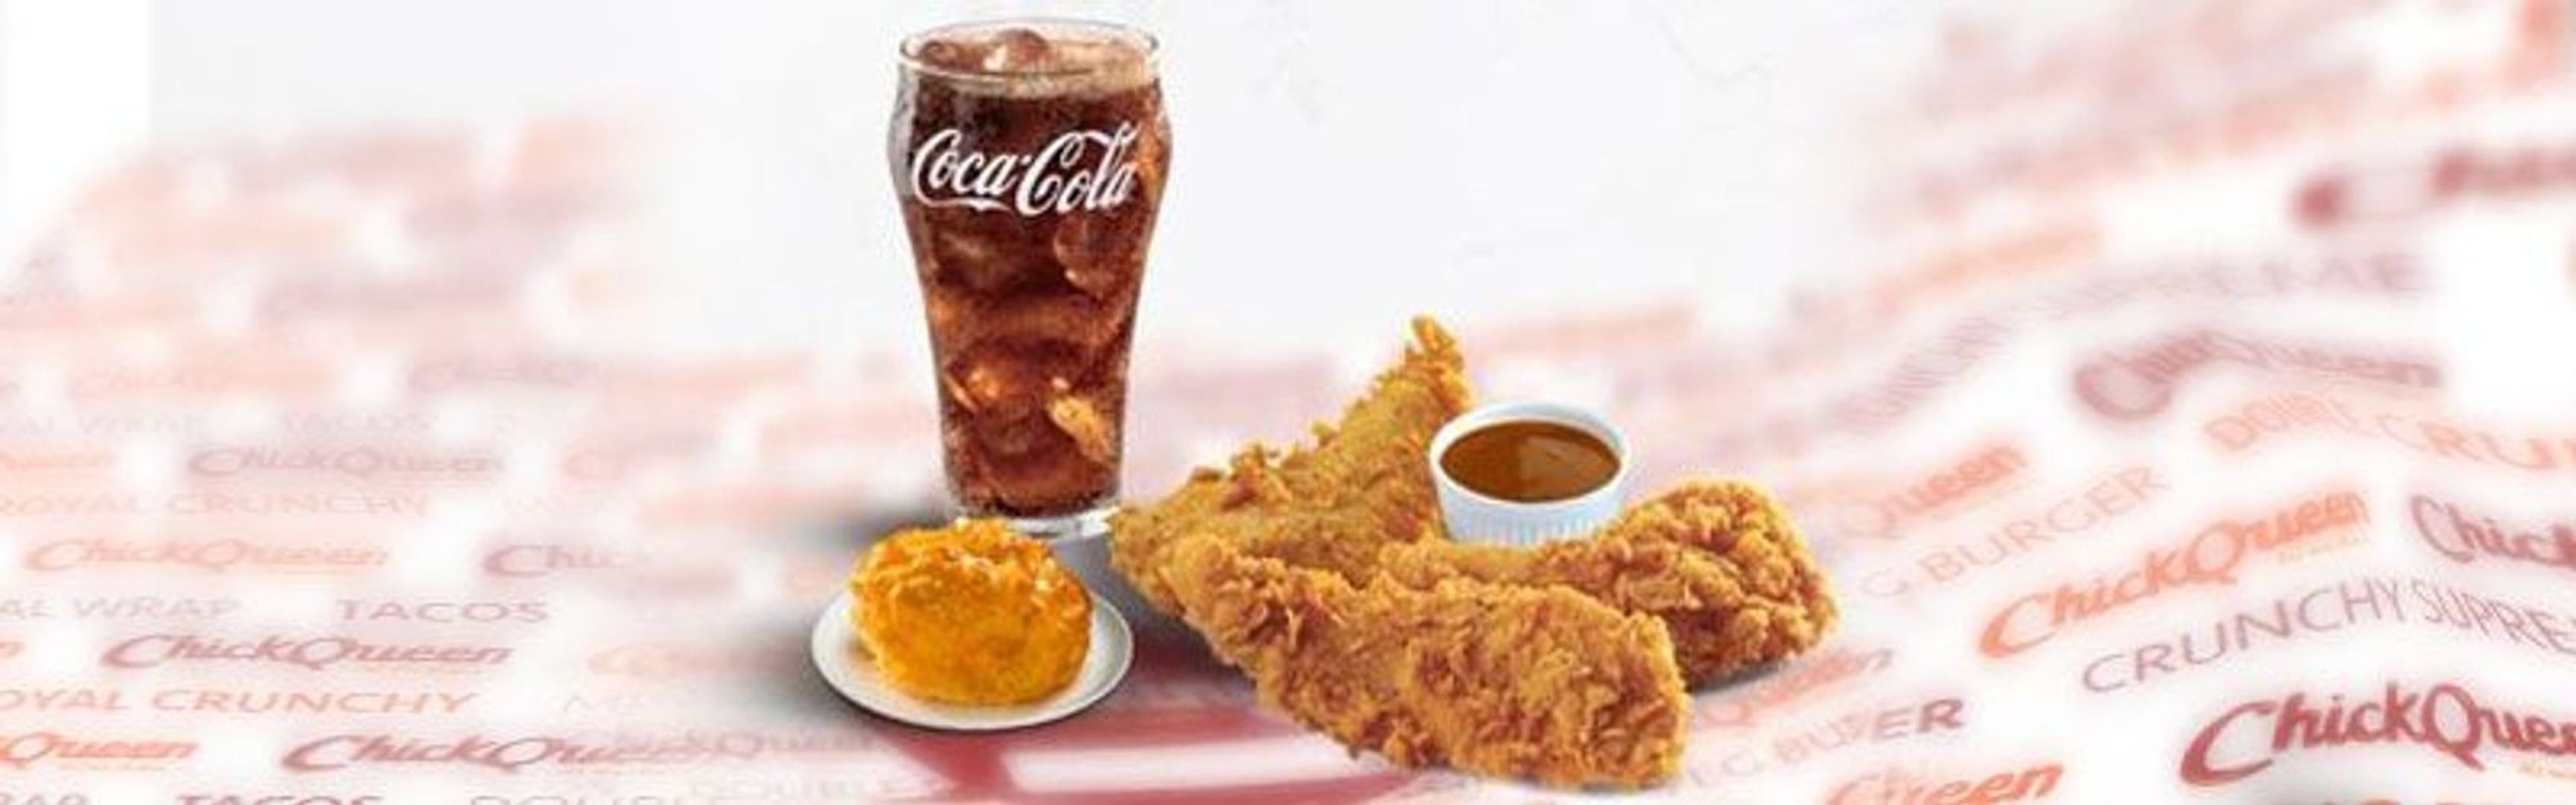 3 Pcs Tenders Combo ( Includes one side, biscuit, dipping sauce and drink)